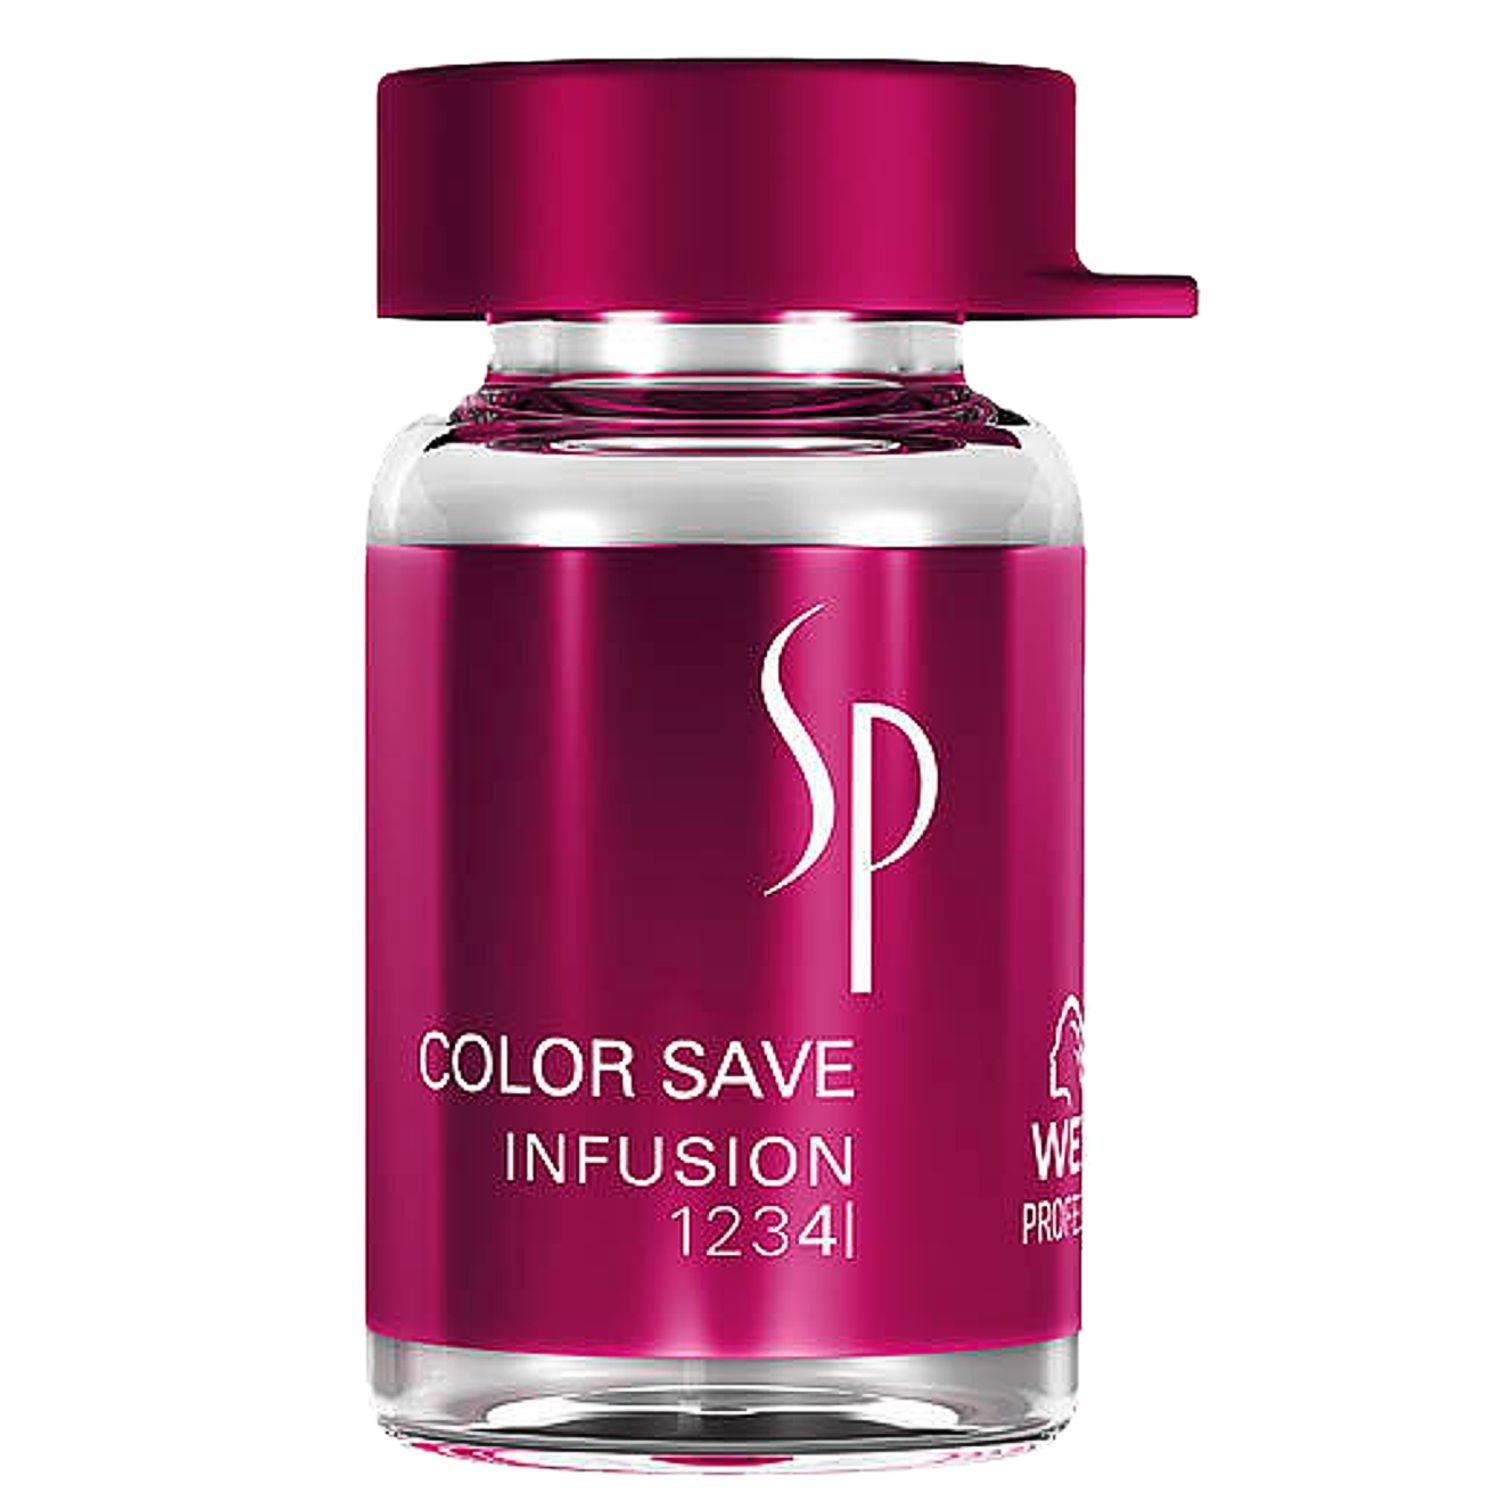 WELLA SP Color Save Infusion 6 x 5 ml